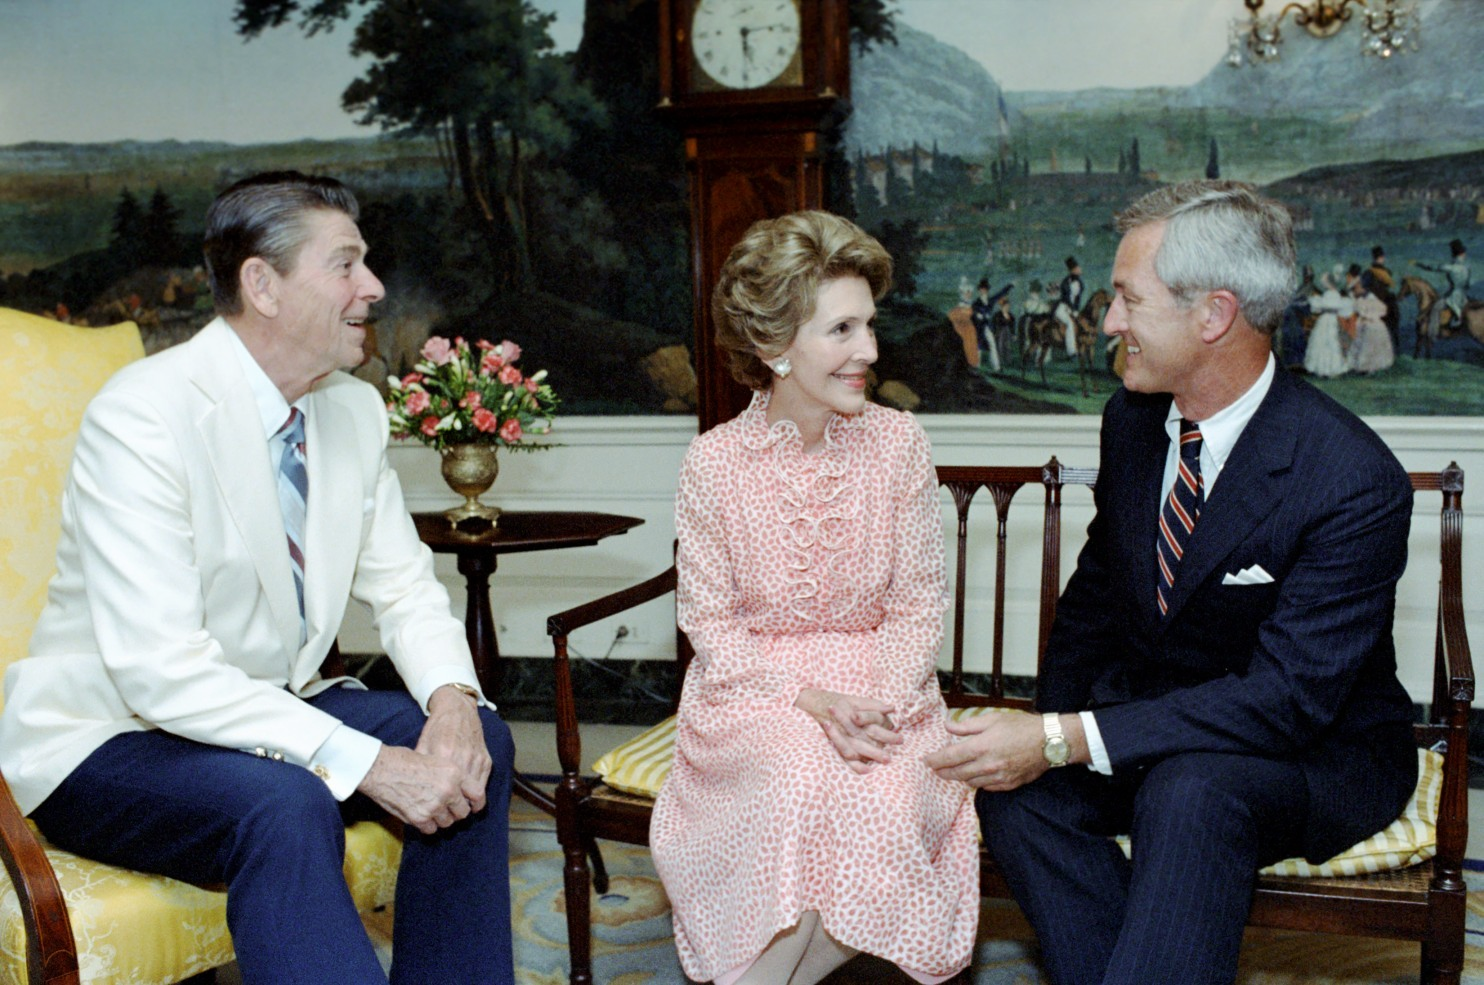 &nbsp; &nbsp; &nbsp; &nbsp; &nbsp; &nbsp; &nbsp;PRESIDENT REAGAN AND NANCY REAGAN SITTING WITH PETER HANNAFORD IN THE DIPLOMATIC RECEPTION ROOM OF THE WHITE HOUSE IN 1981